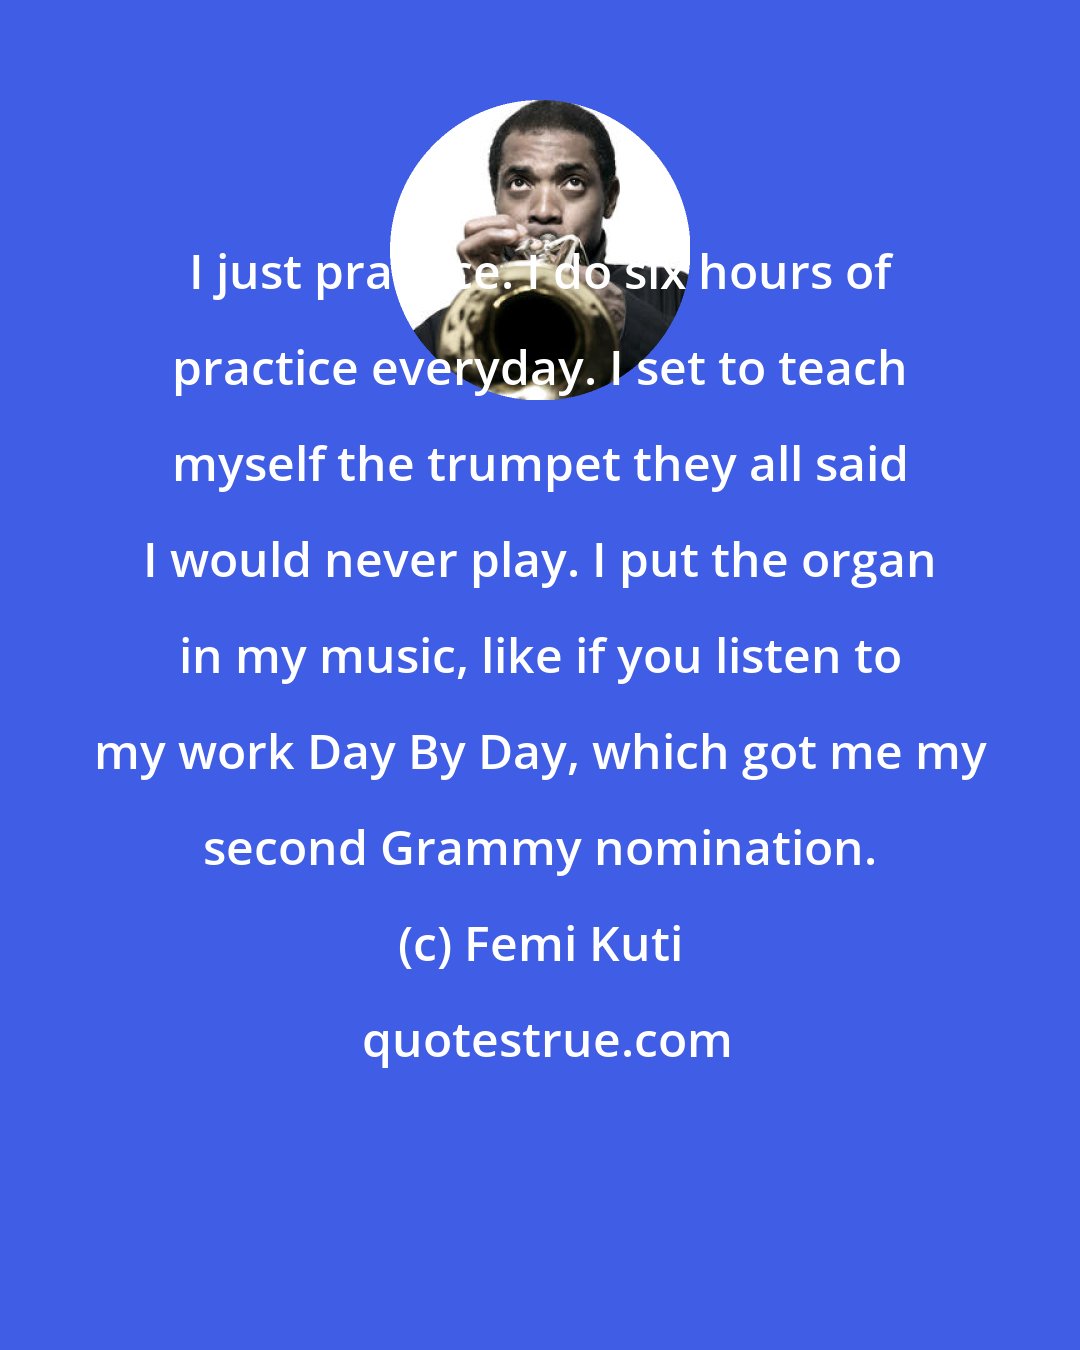 Femi Kuti: I just practice. I do six hours of practice everyday. I set to teach myself the trumpet they all said I would never play. I put the organ in my music, like if you listen to my work Day By Day, which got me my second Grammy nomination.